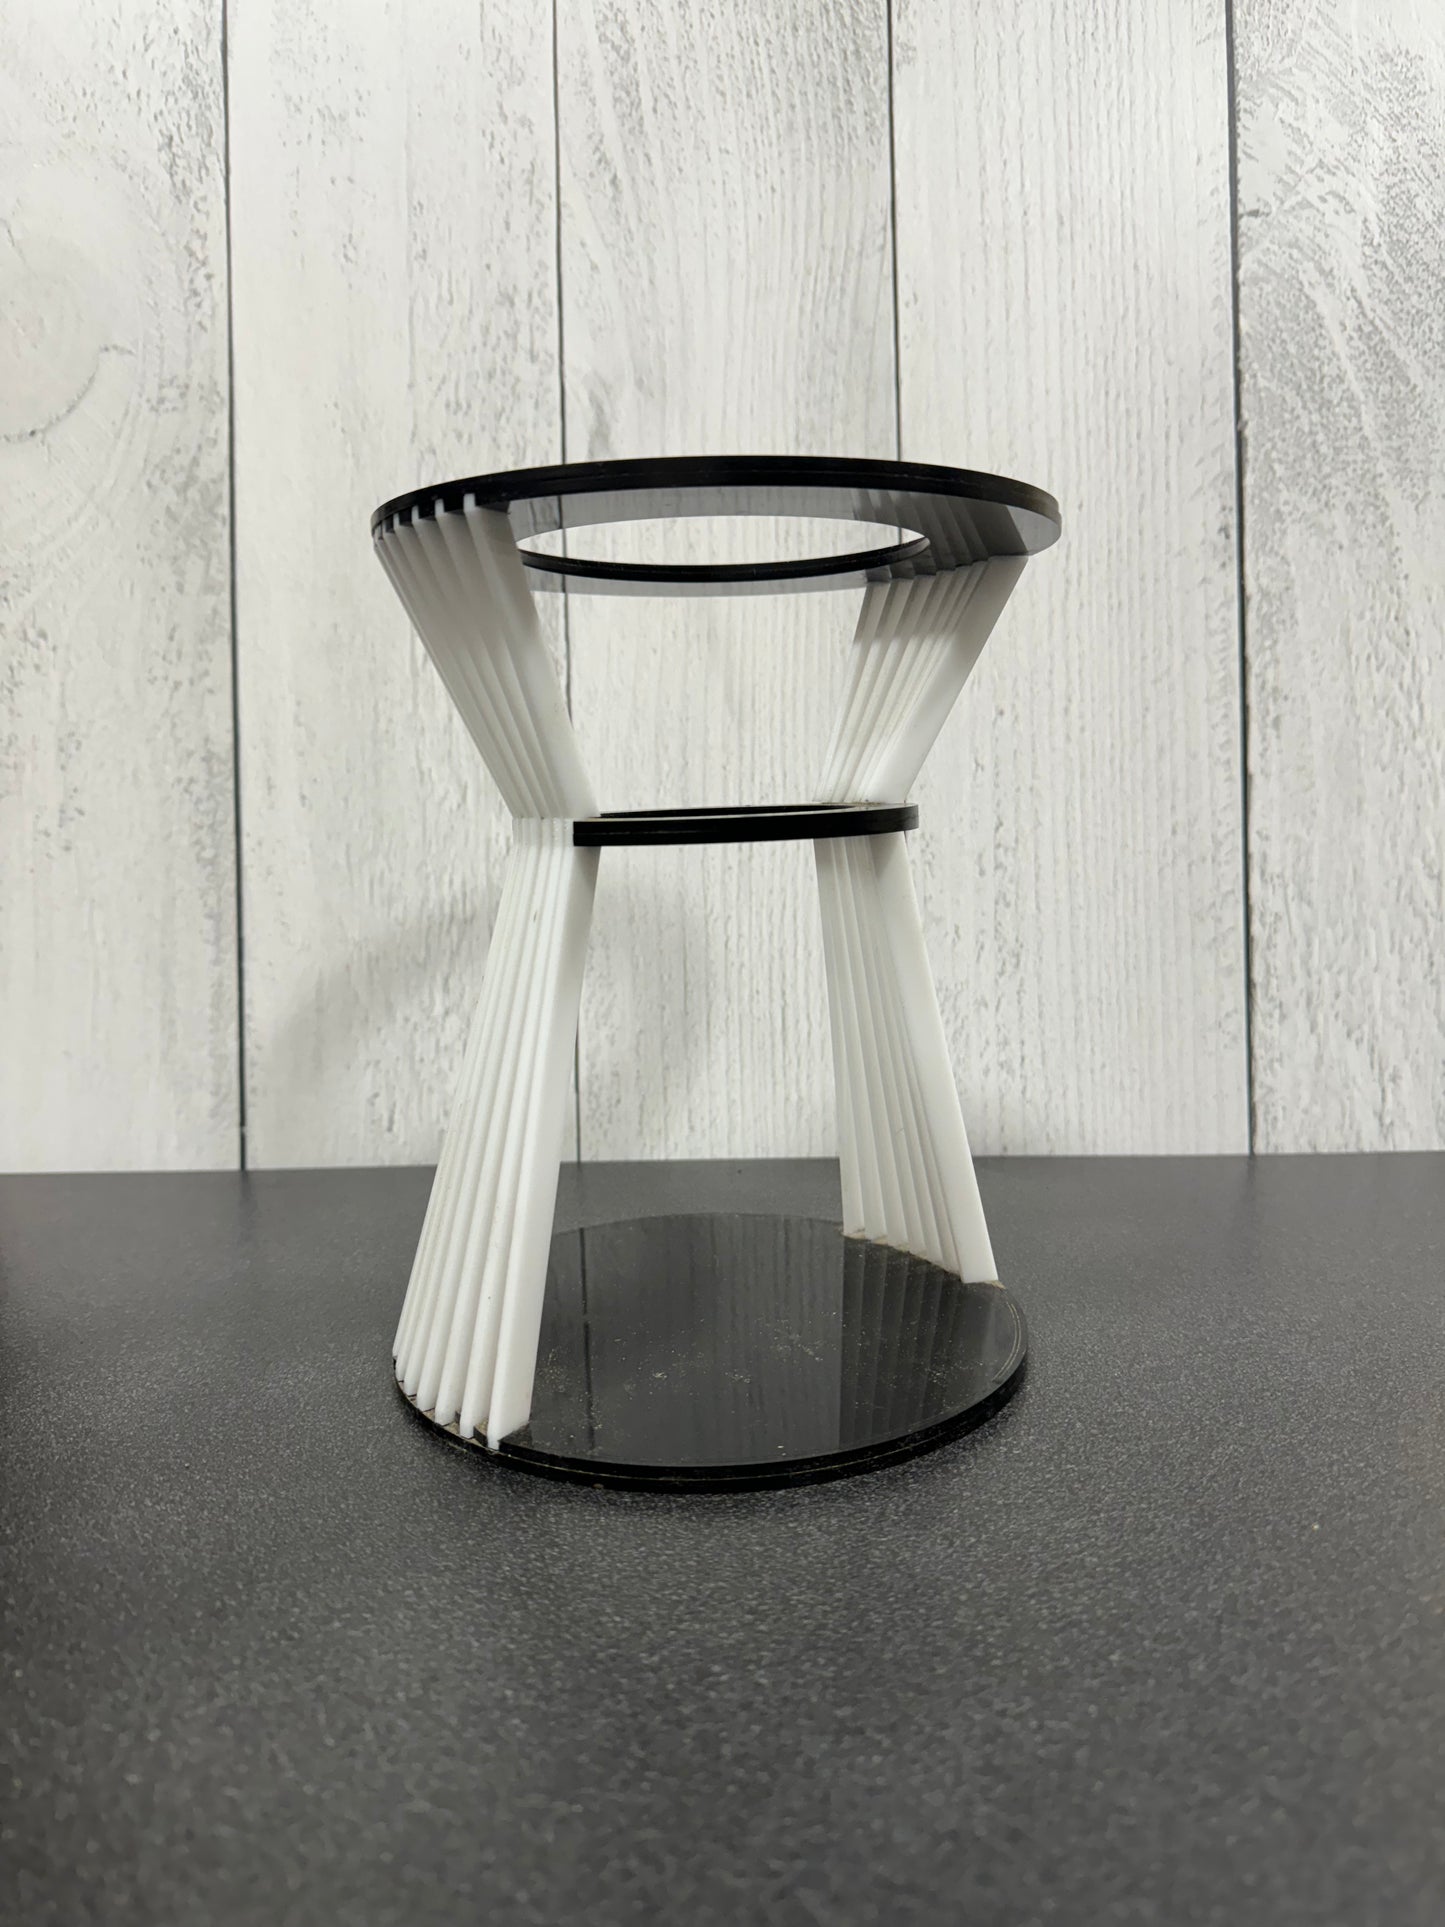 DIY Coffee Pour over stand